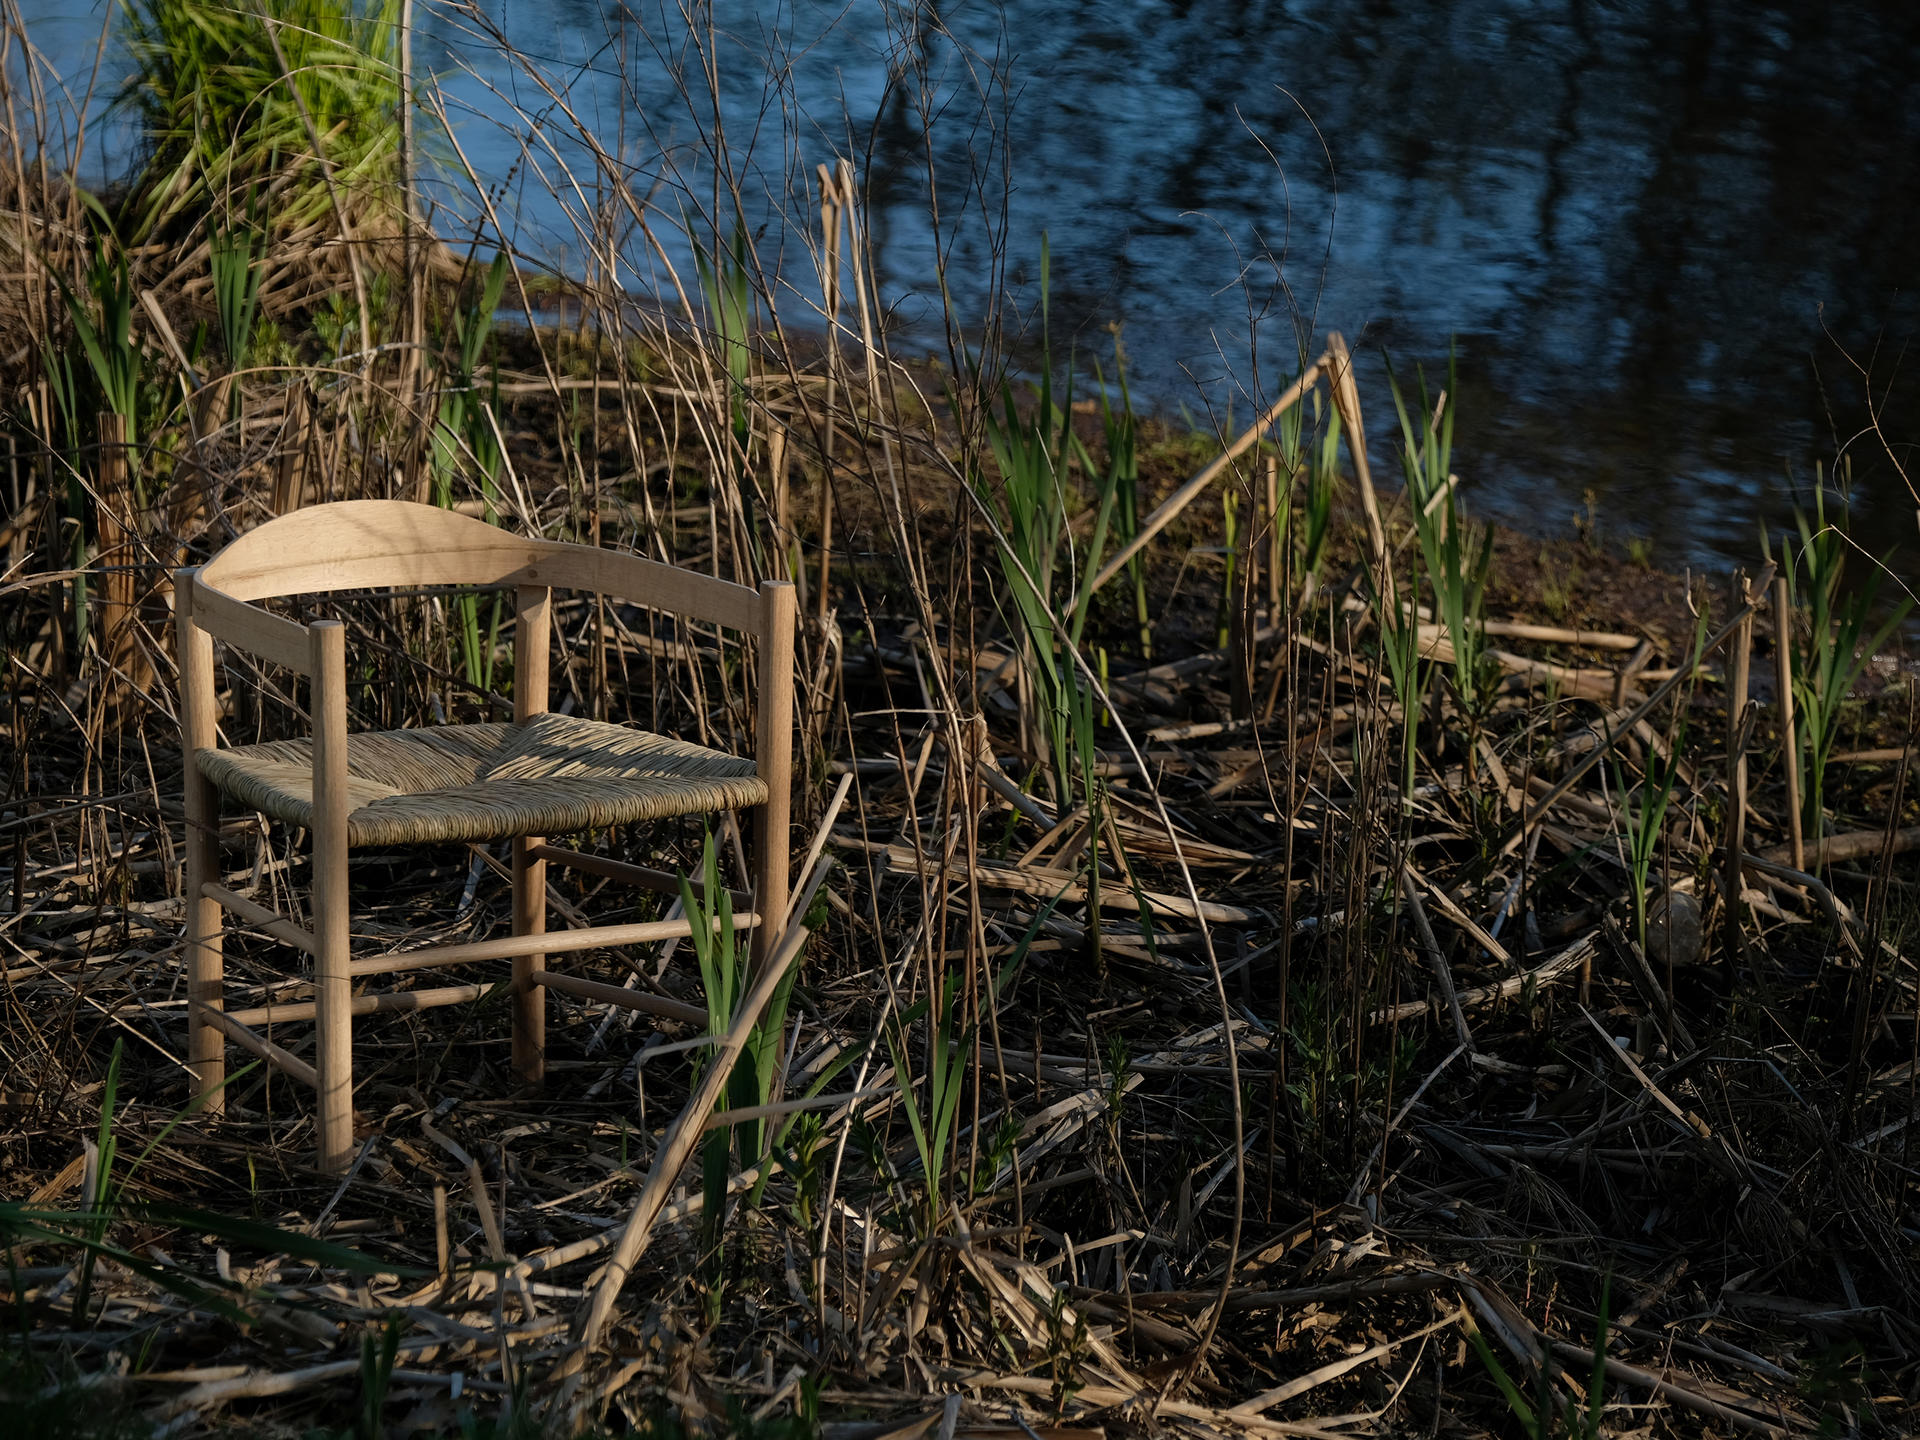 Image of the Counting Calories chair on a bank of the Pawtuxet River where some of the cattails for its seat were harvest in autumn.